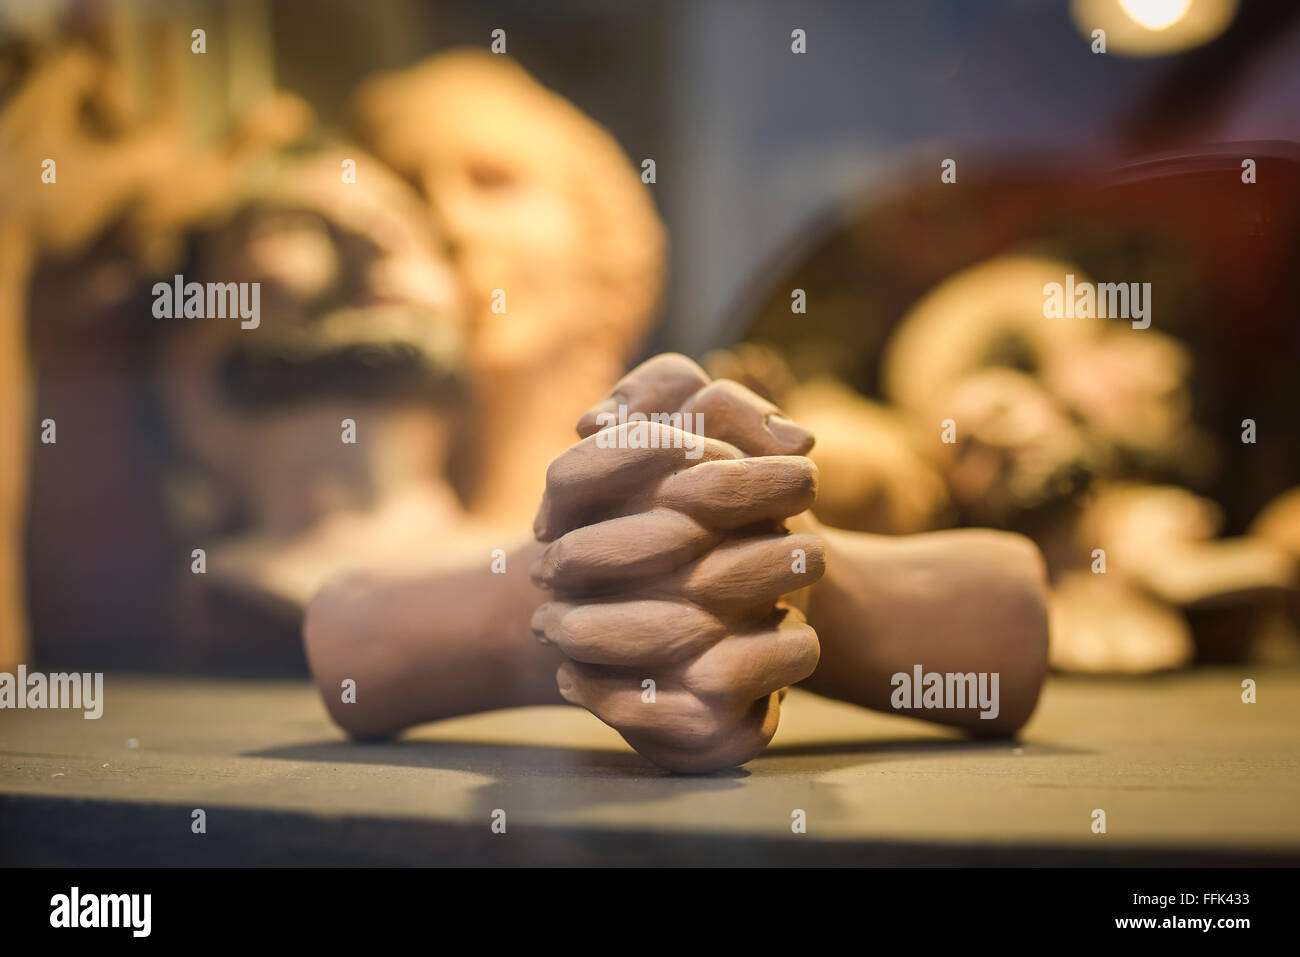 Hands prayer, view of a pair of terracotta hands clasped as if in prayer forming part of a display in a sculptor's shop window in Naples, Italy. Stock Photo